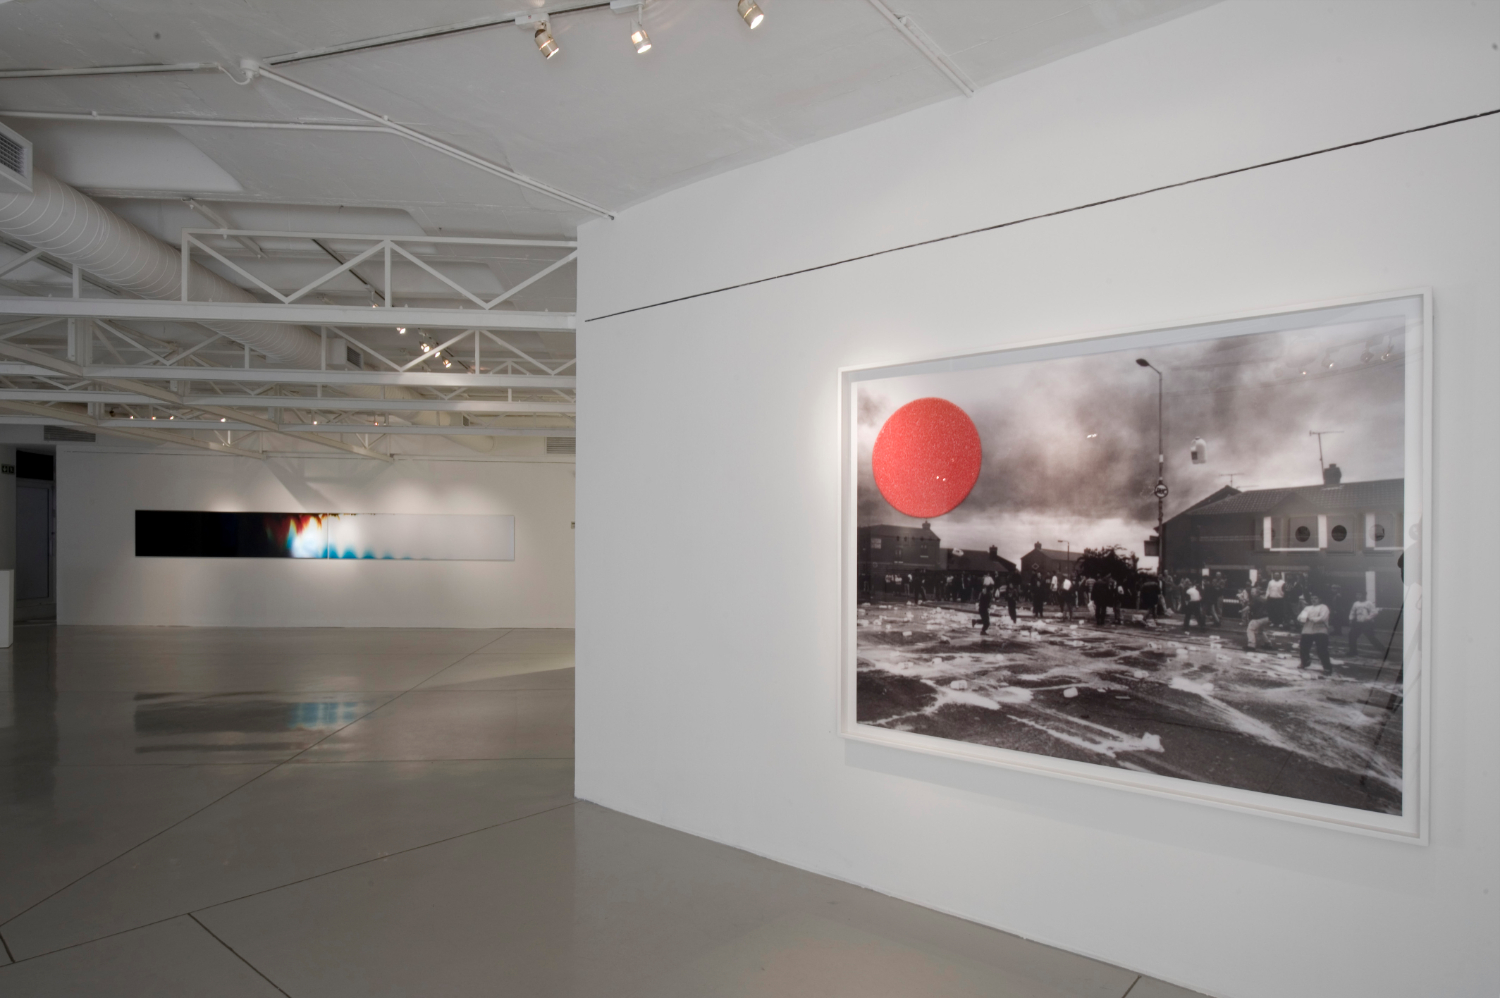 People in Trouble Laughing Pushed to the Ground (Contacts), Installation View, image © Goodman Gallery, 2011 - 5.jpg